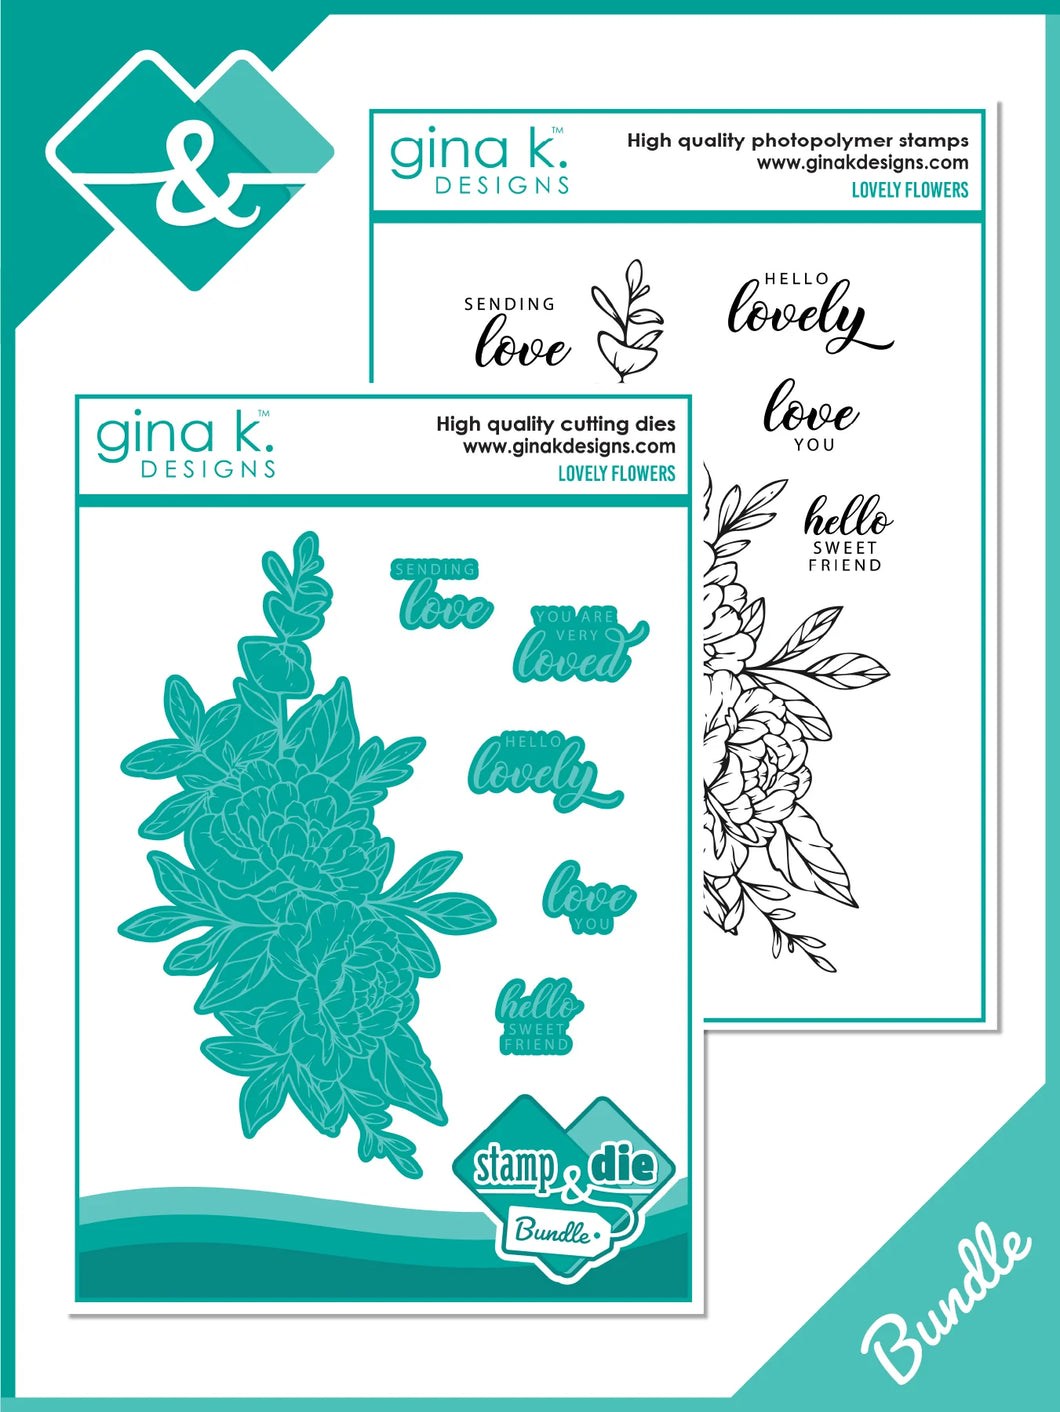 Gina K. Designs - Stamp & Die Set - Lovely Flowers. Lovely Flowers is a stamp set by Gina K Designs. This set is made of premium clear photopolymer and measures 6